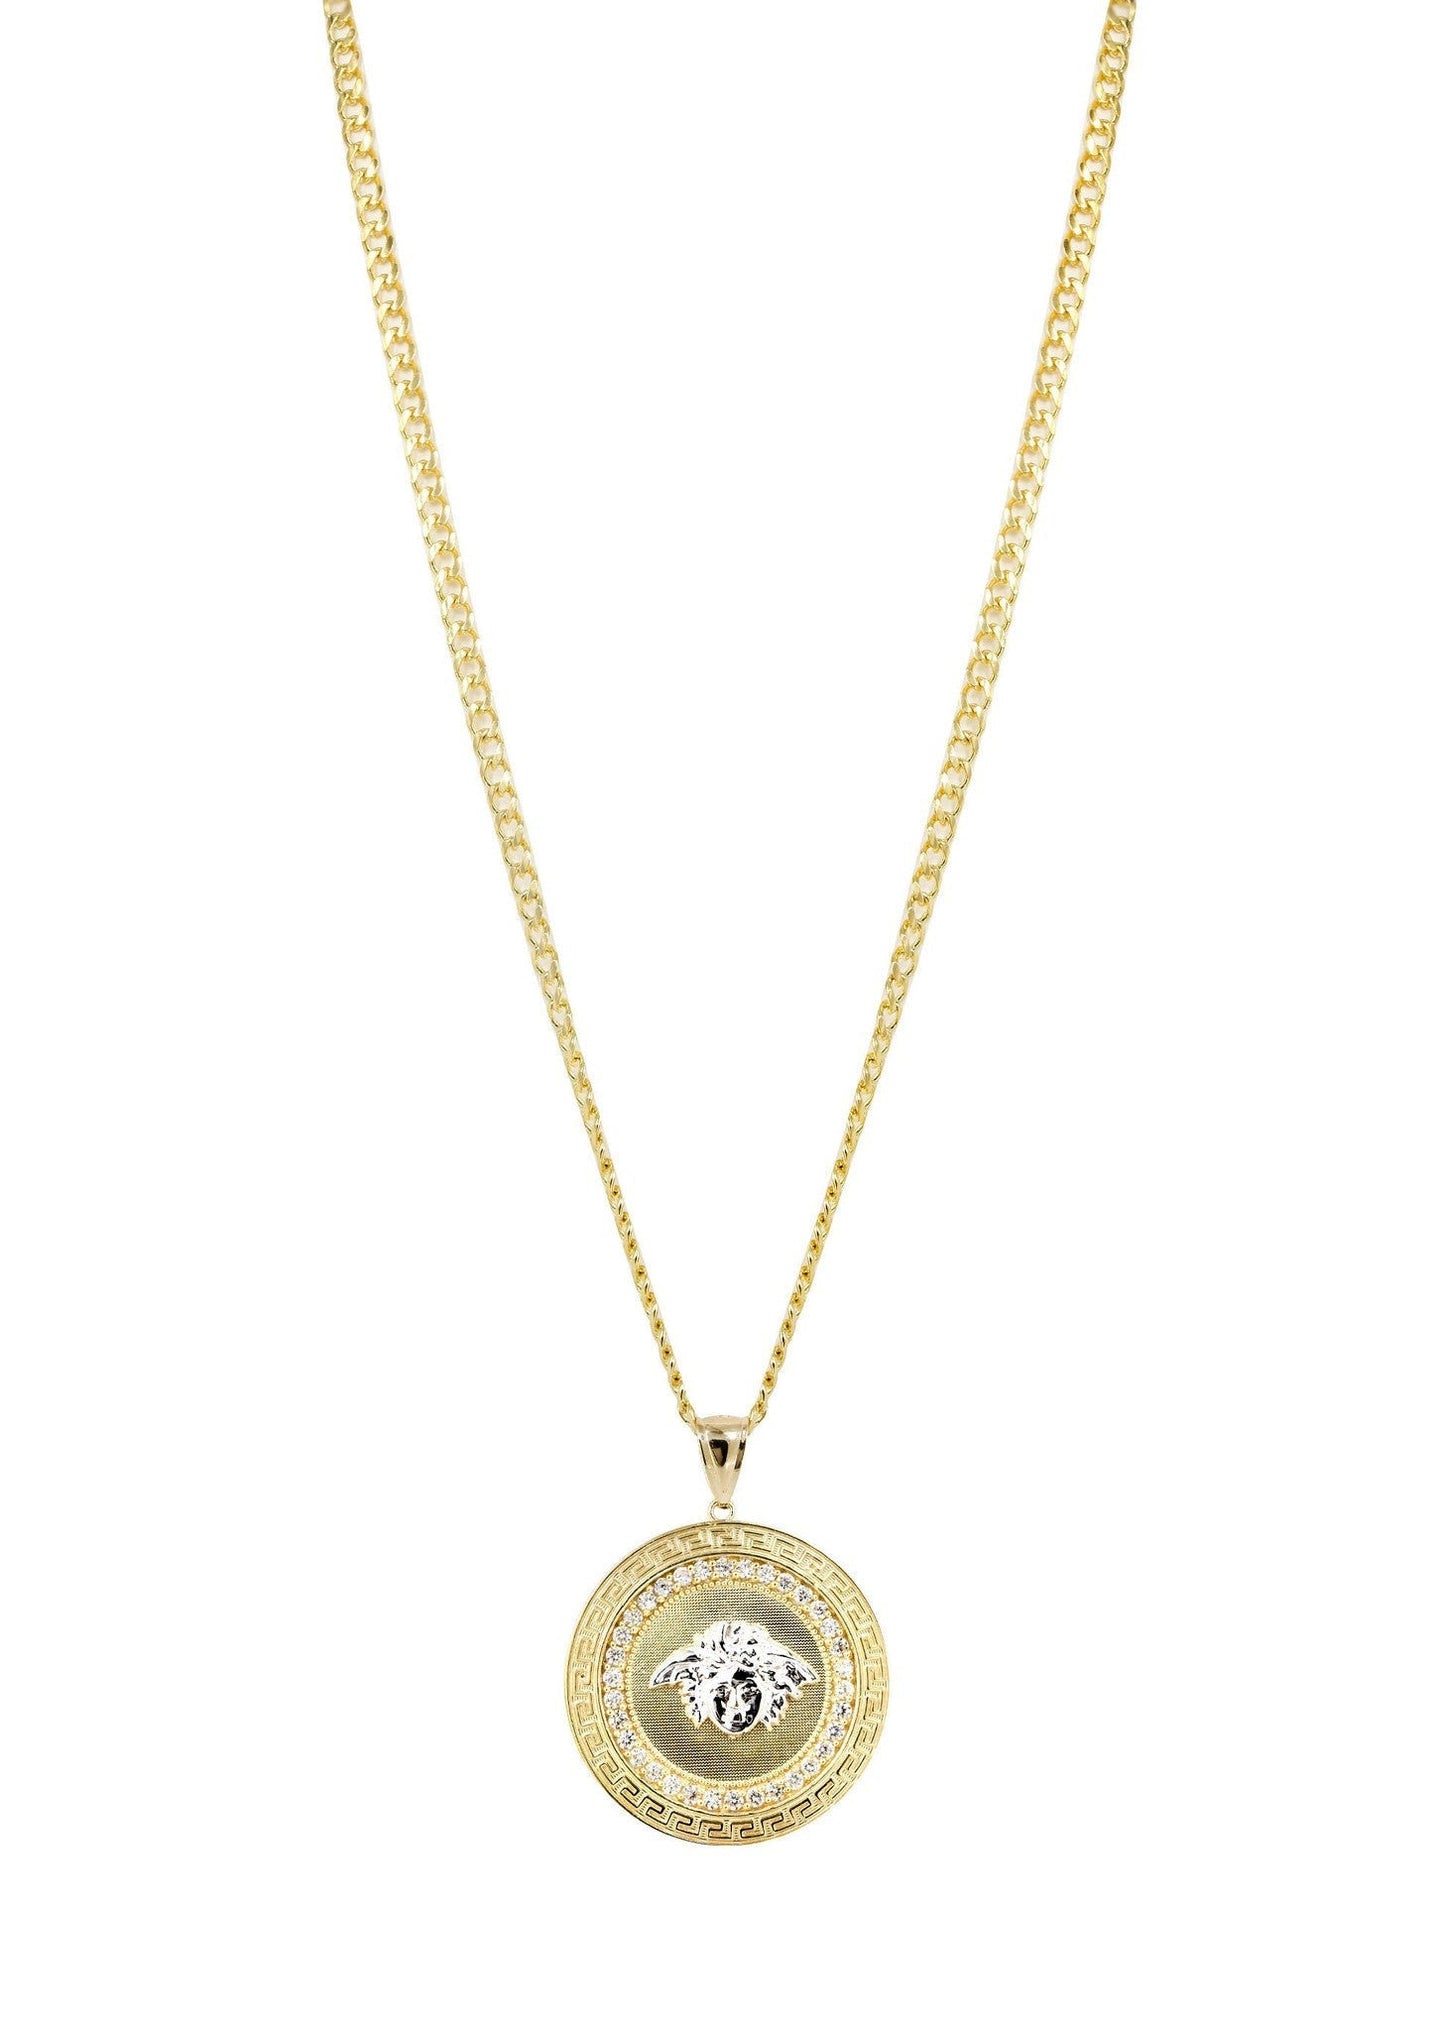 10K Yellow Gold Cuban Chain & Versace Style Necklace